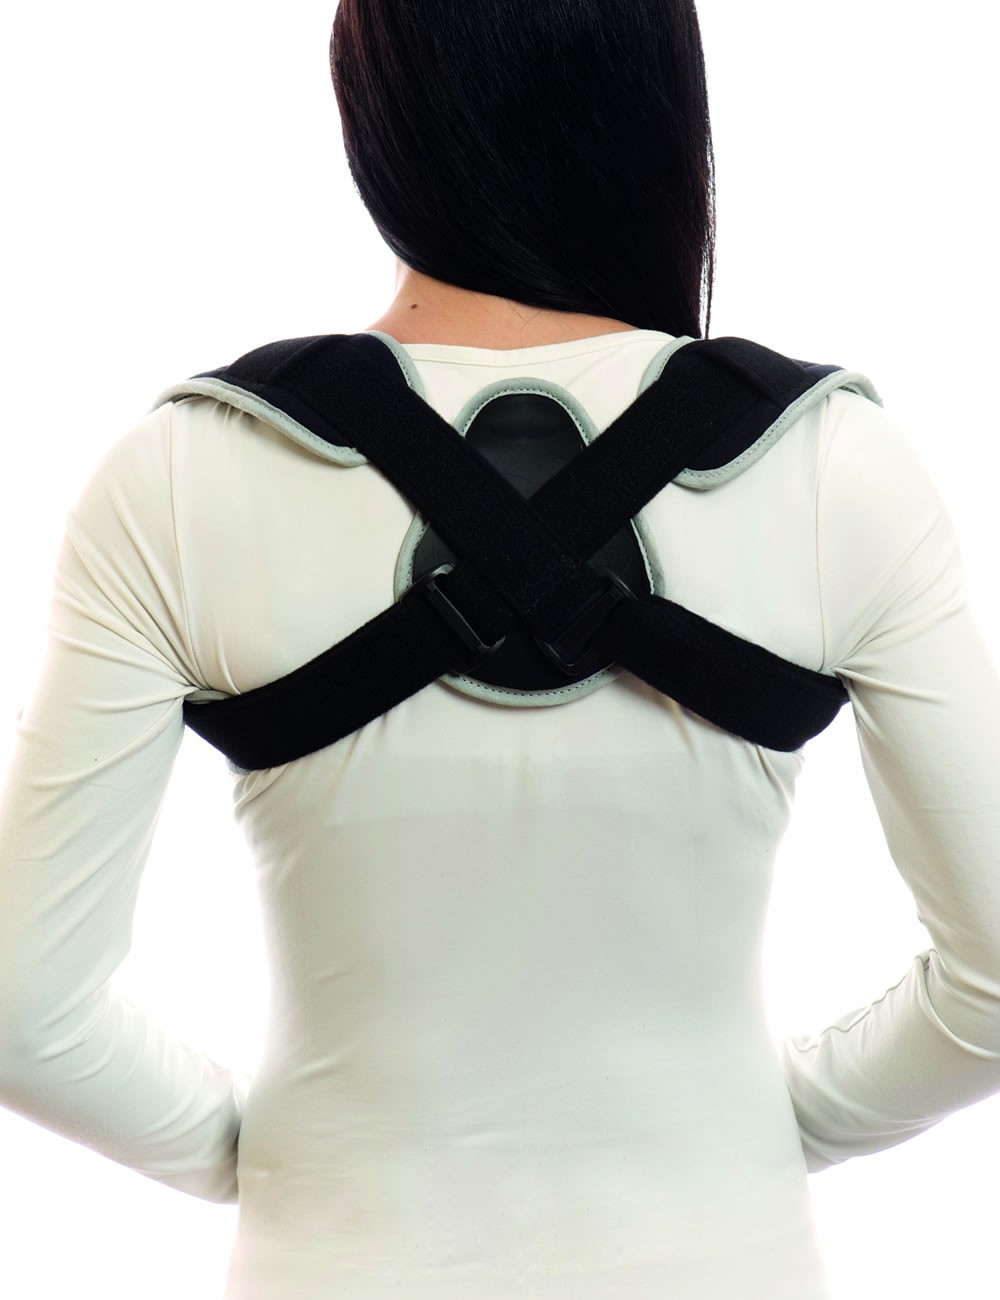 SK405 - Immobilizing clavicle support